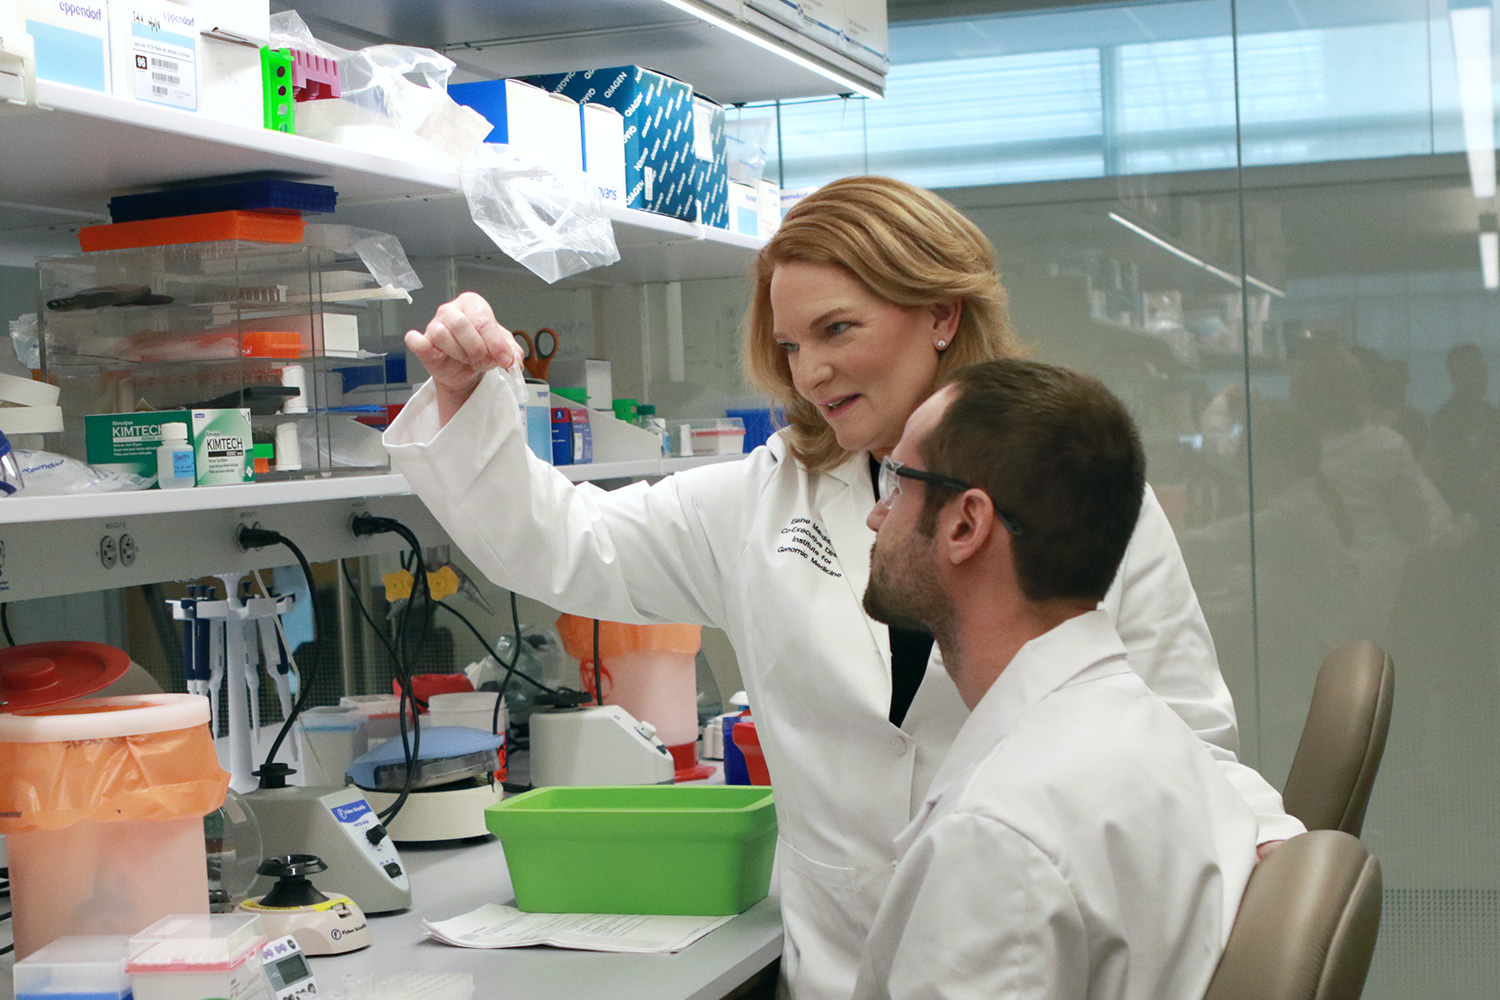 Dr. Elaine R. Mardis and genetic technologist Anthony Miller, PhD, discuss the purification of RNA from pediatric cancer samples. Dr. Mardis and Dr. Miller are shown in the laboratory of the Institute for Genomic Medicine at Nationwide Children’s Hospital in Columbus, Ohio.